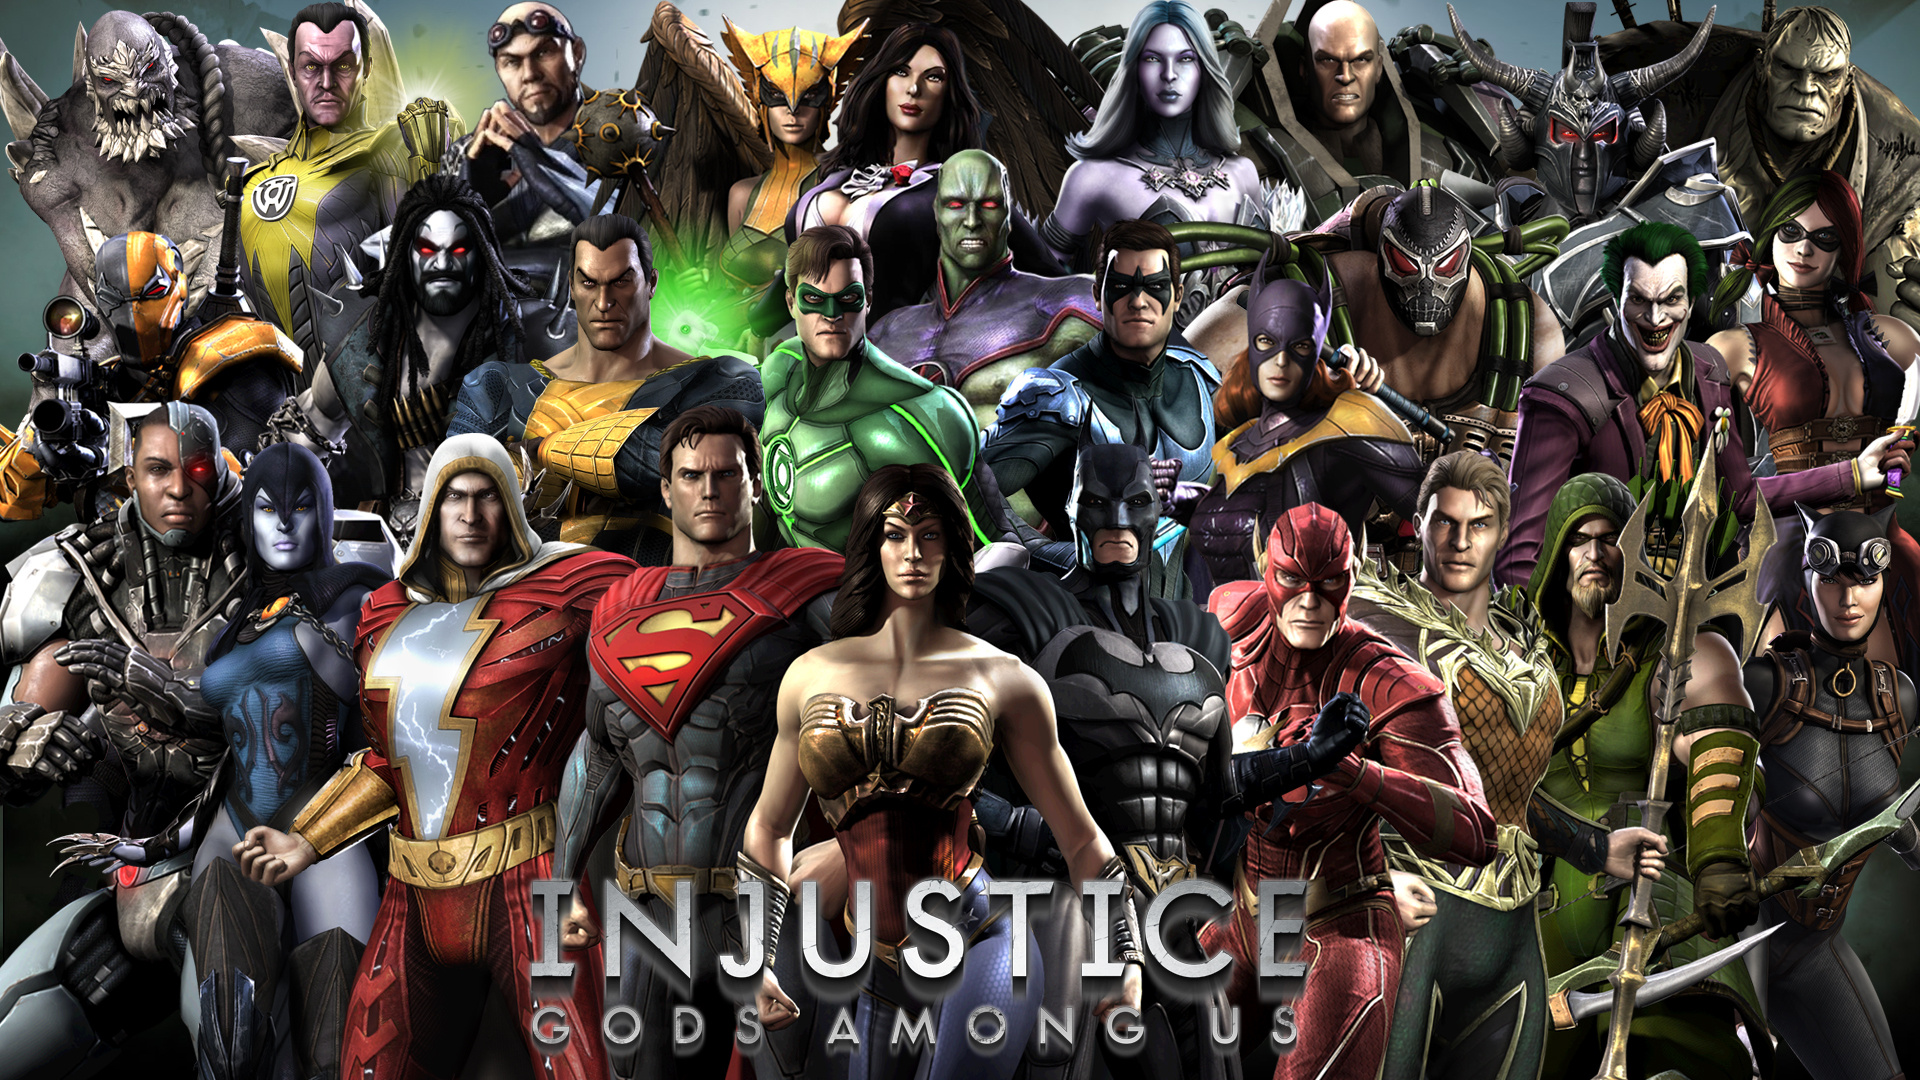 Injustice: Gods Among Us, Rumor mill, Sequel speculations, Gaming news, 1920x1080 Full HD Desktop